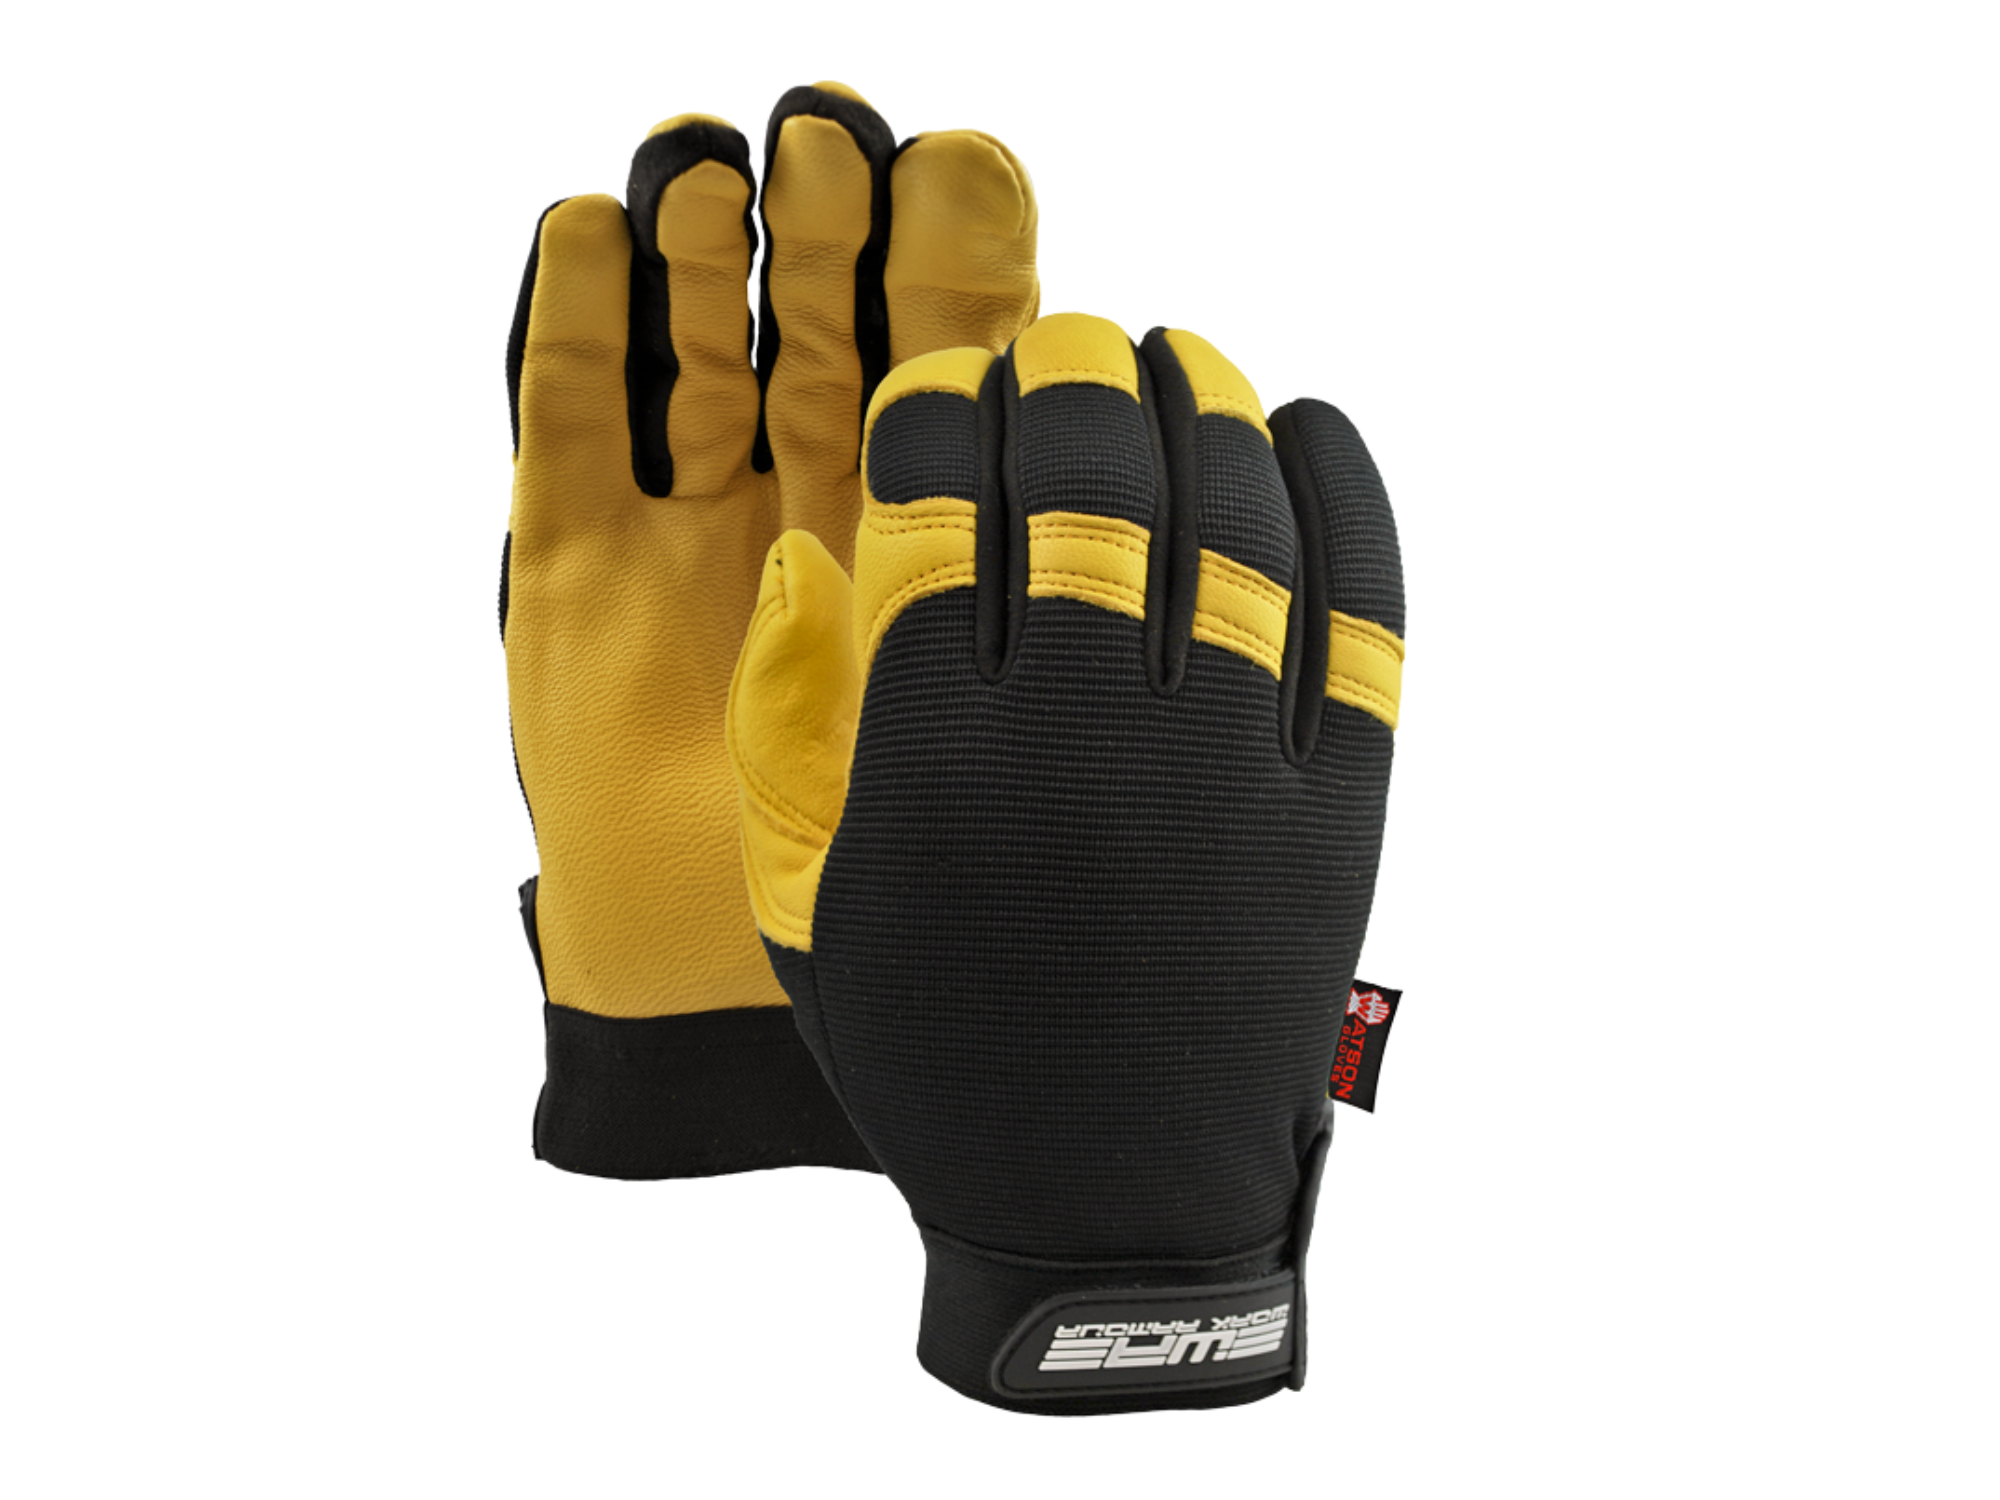 Watson gloves Flextime Leather Workshop Glove – an IndyBest Award Winning garden and workshop glove - available from UK stockist Tinker and Fix for £14.99